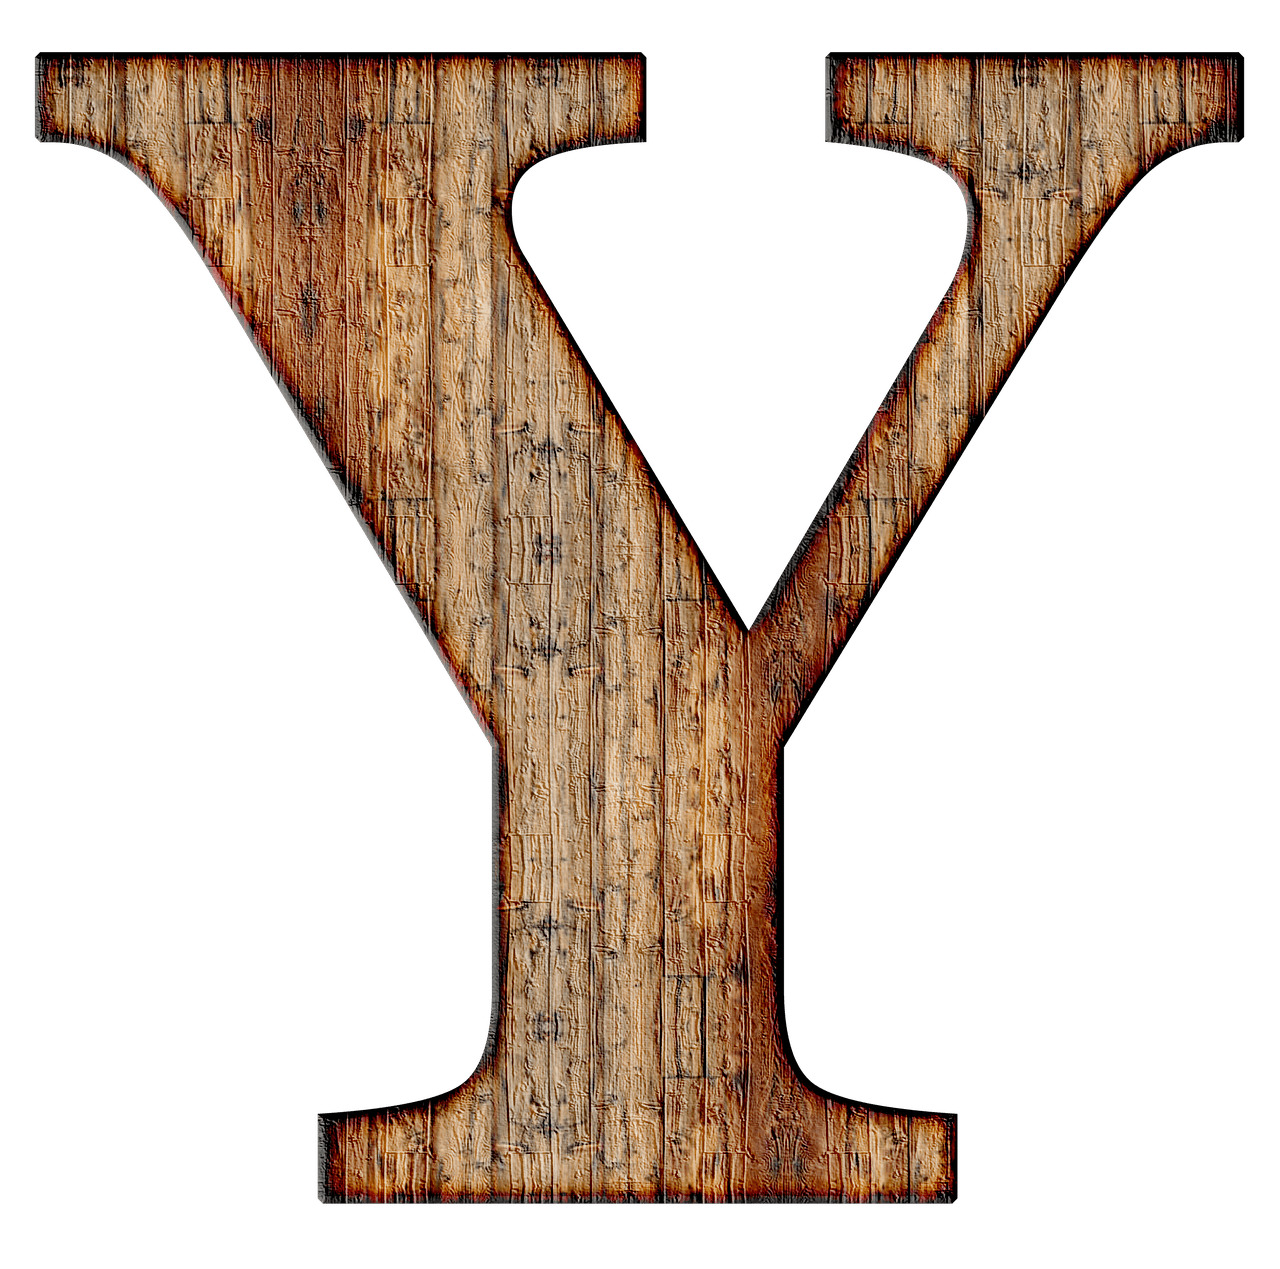 Wooden Capital Letter Y icons